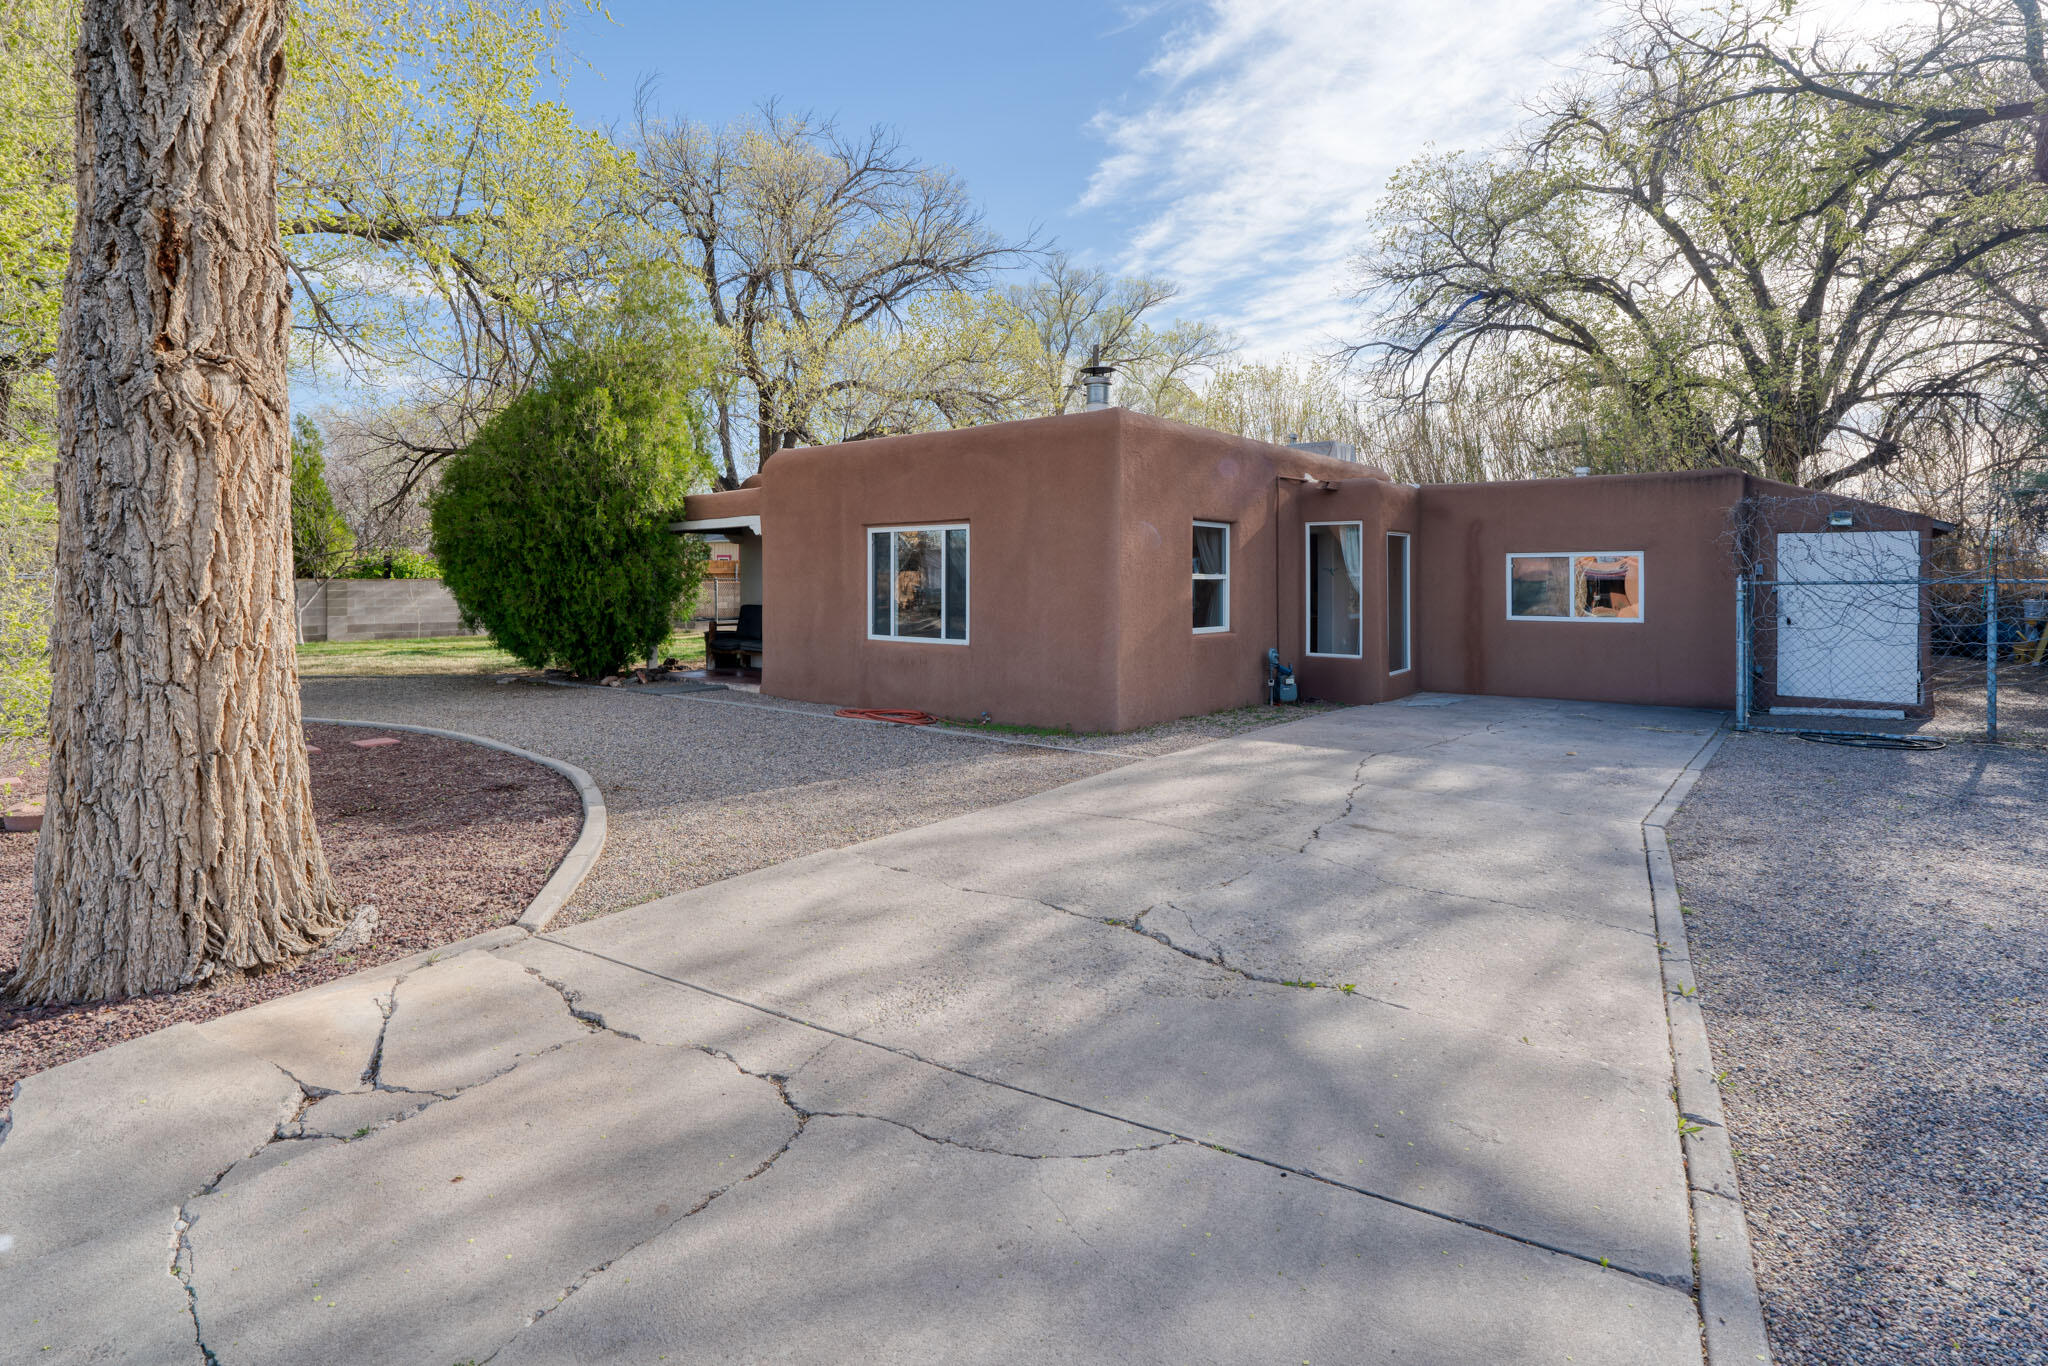 3006 9th Street NW, Albuquerque, New Mexico 87107, 3 Bedrooms Bedrooms, ,1 BathroomBathrooms,Residential,For Sale,3006 9th Street NW,1059827